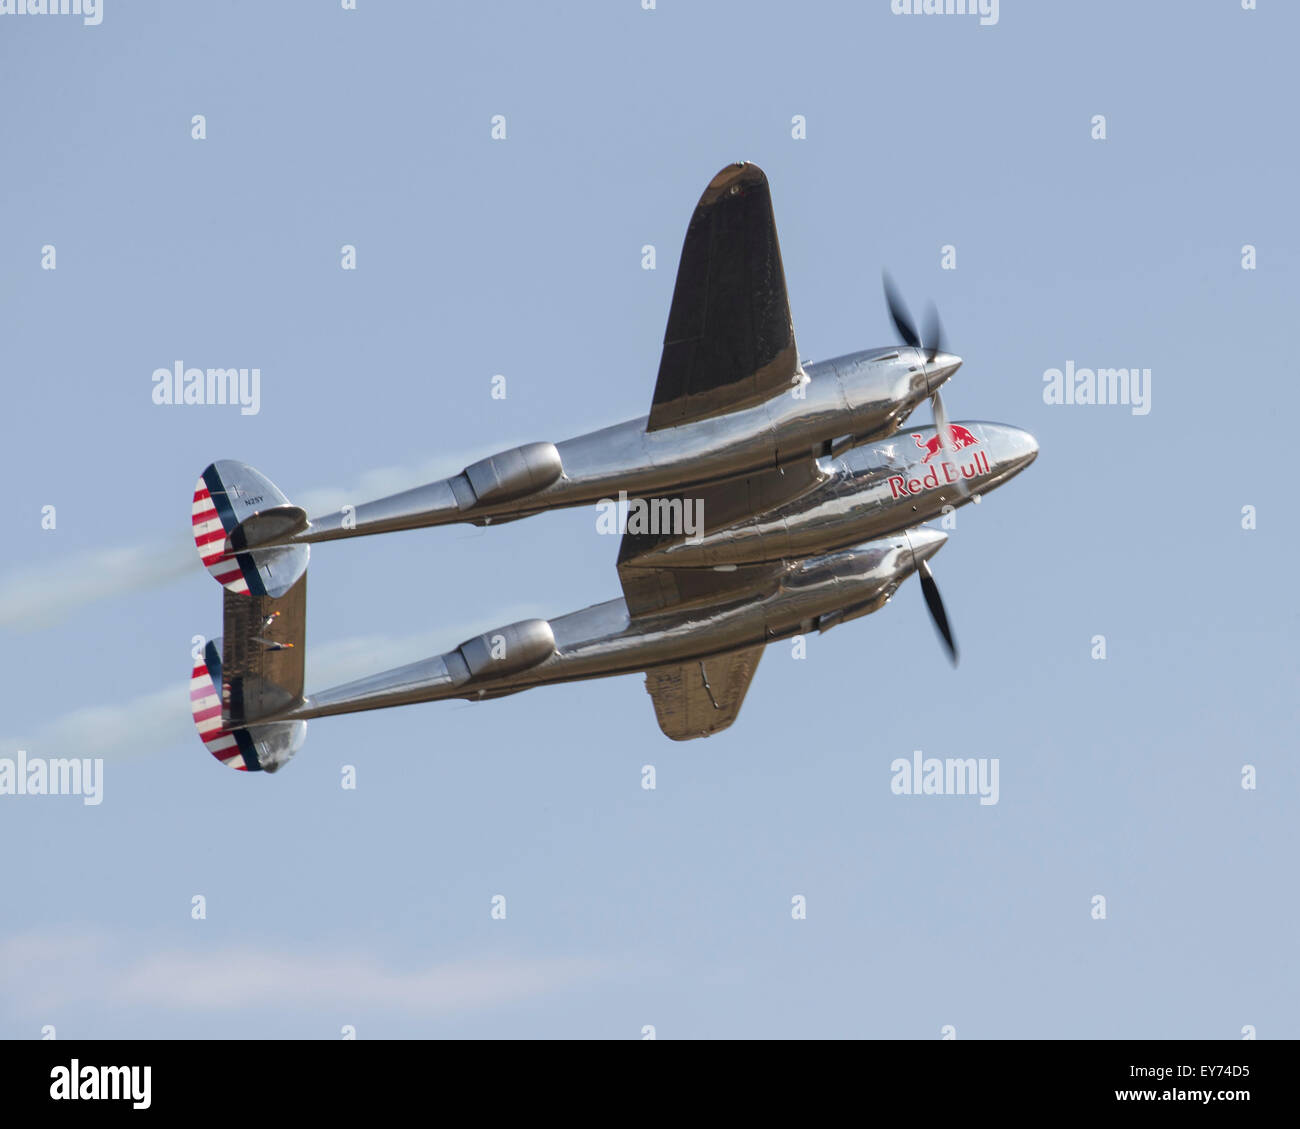 Lockheed P38-L Lightning USAF World War 2 fighter aircraft owned by 'Red Bull' at the 2015 Flying Legends air show Stock Photo